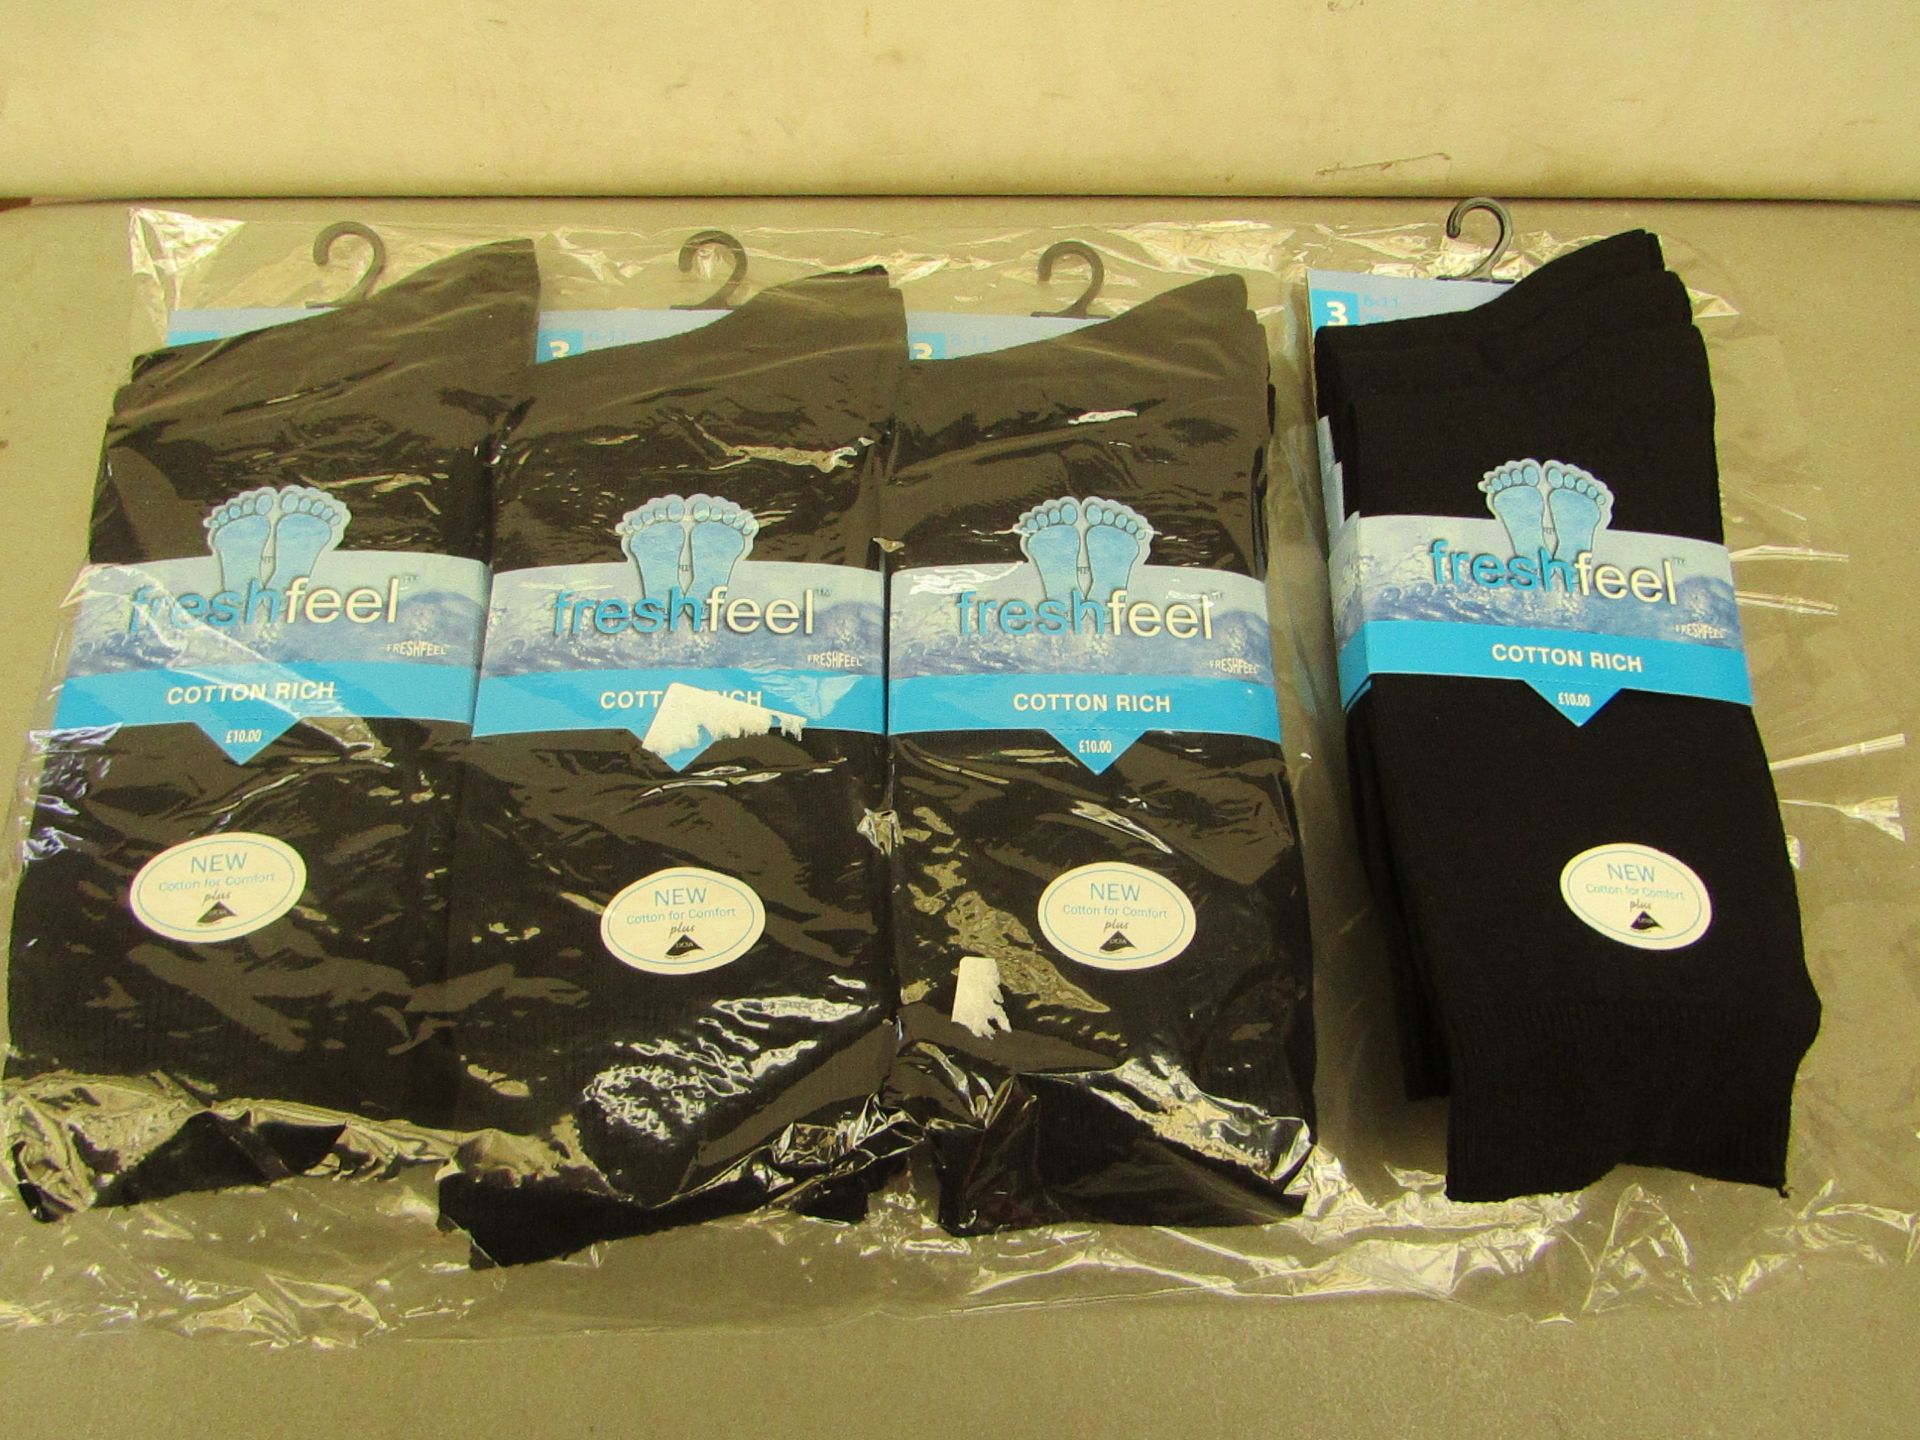 12 x pairs of Fresh Feel Black Cotton Rich with Lycra for Comfort Socks size 6-11 new & packaged